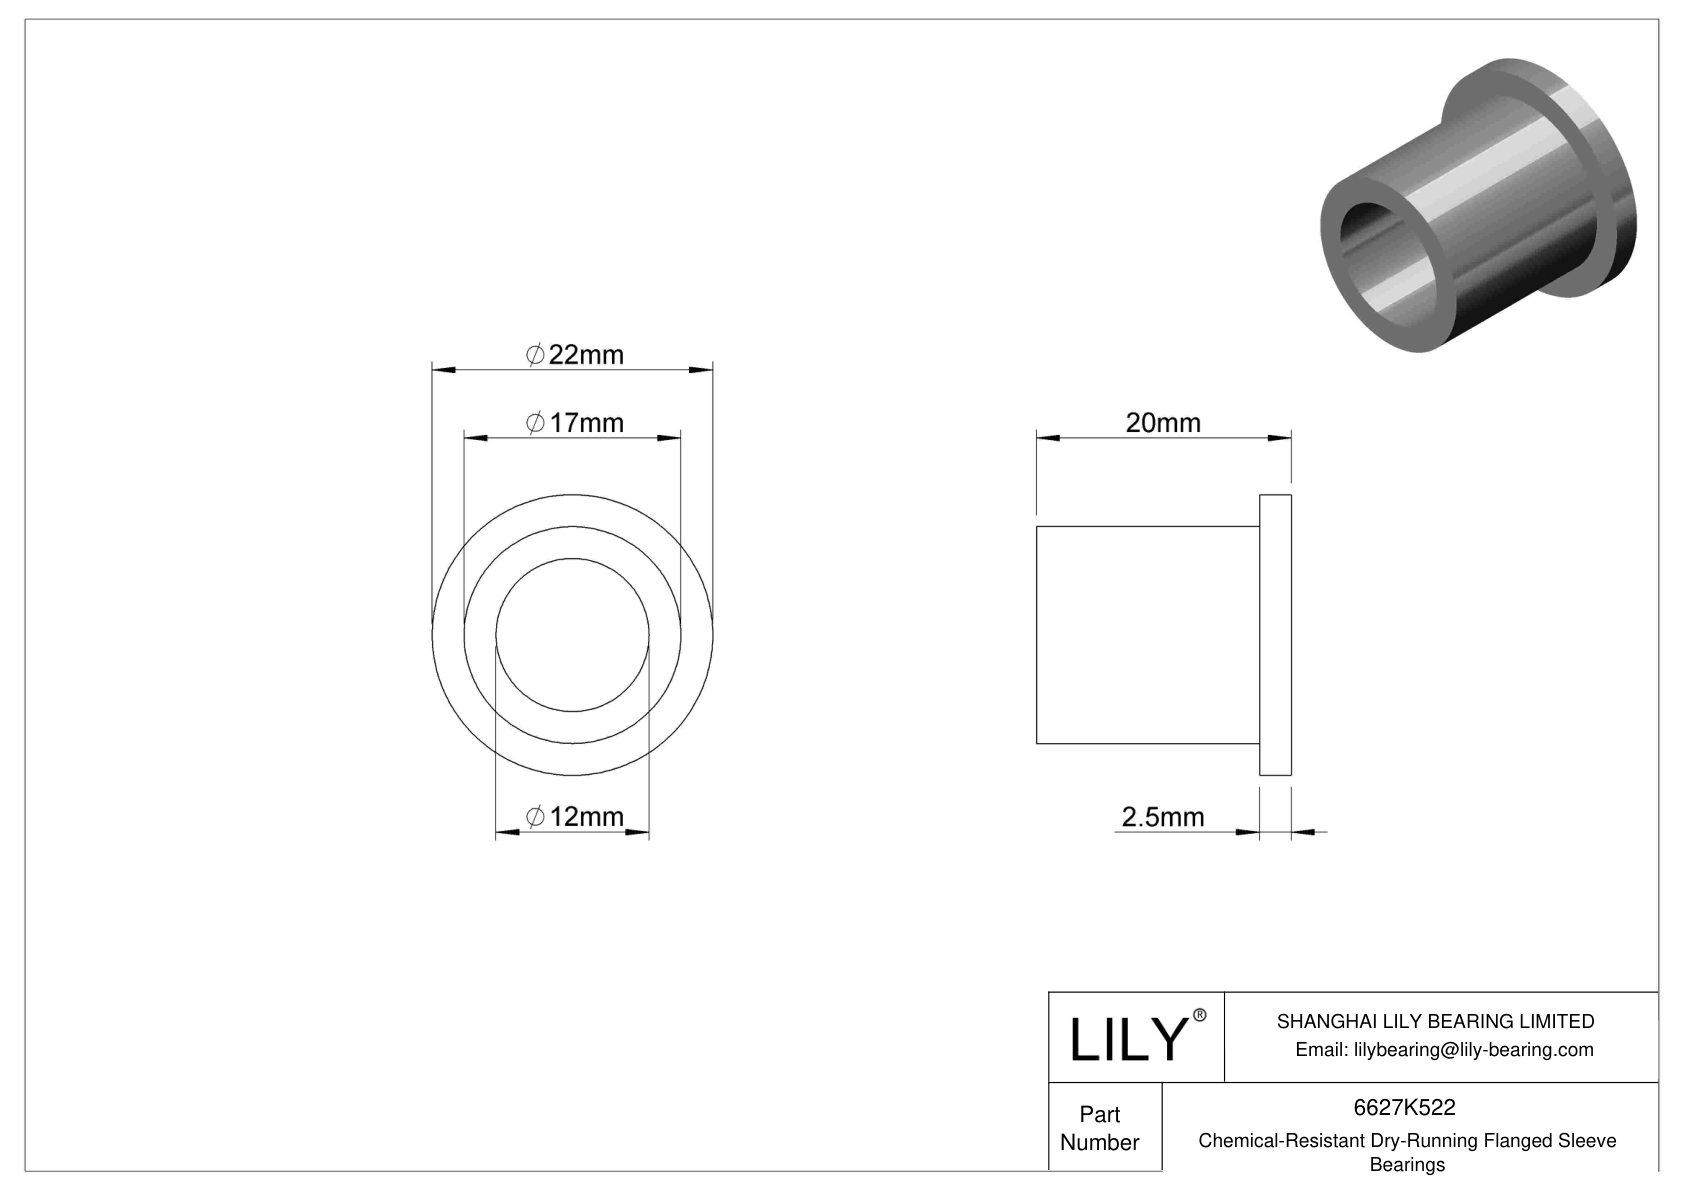 GGCHKFCC Chemical-Resistant Dry-Running Flanged Sleeve Bearings cad drawing